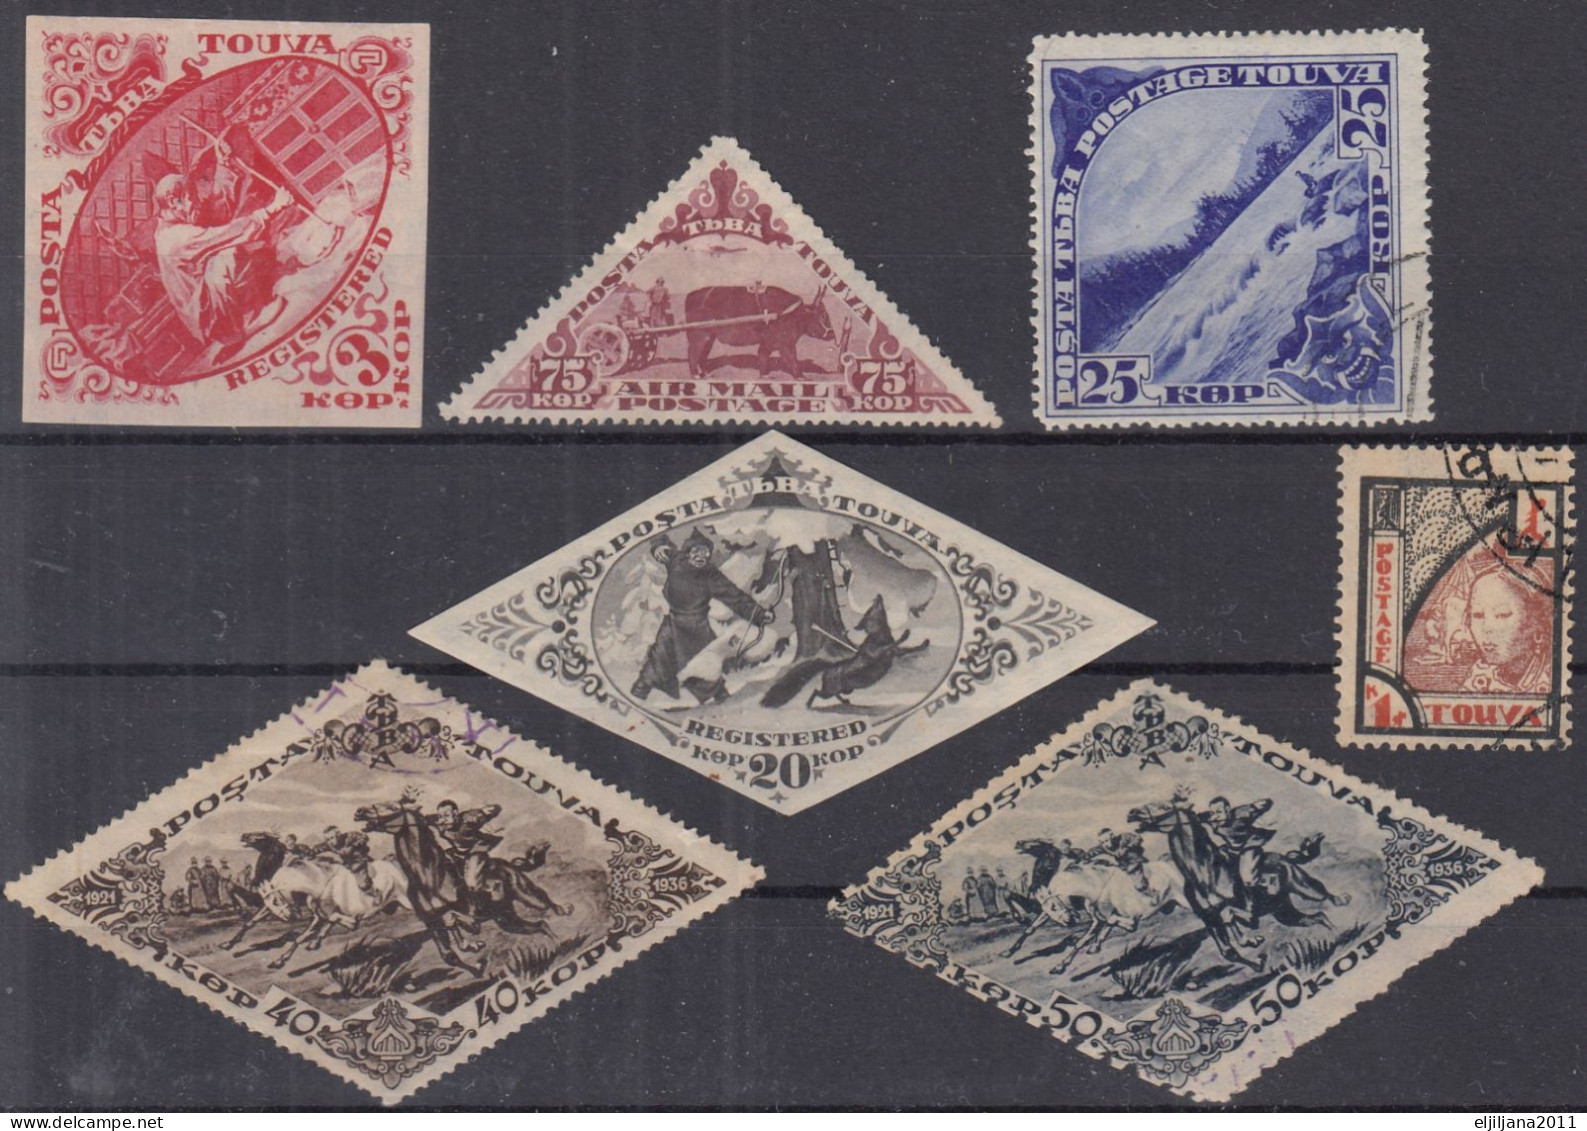 SALE !! 50 % OFF !! ⁕ TOUVA Tannu-Tuva (Northern Mongolia) ⁕ Collection From 1927 - 1936 ⁕ 7v MH & Used - Scan - Touva